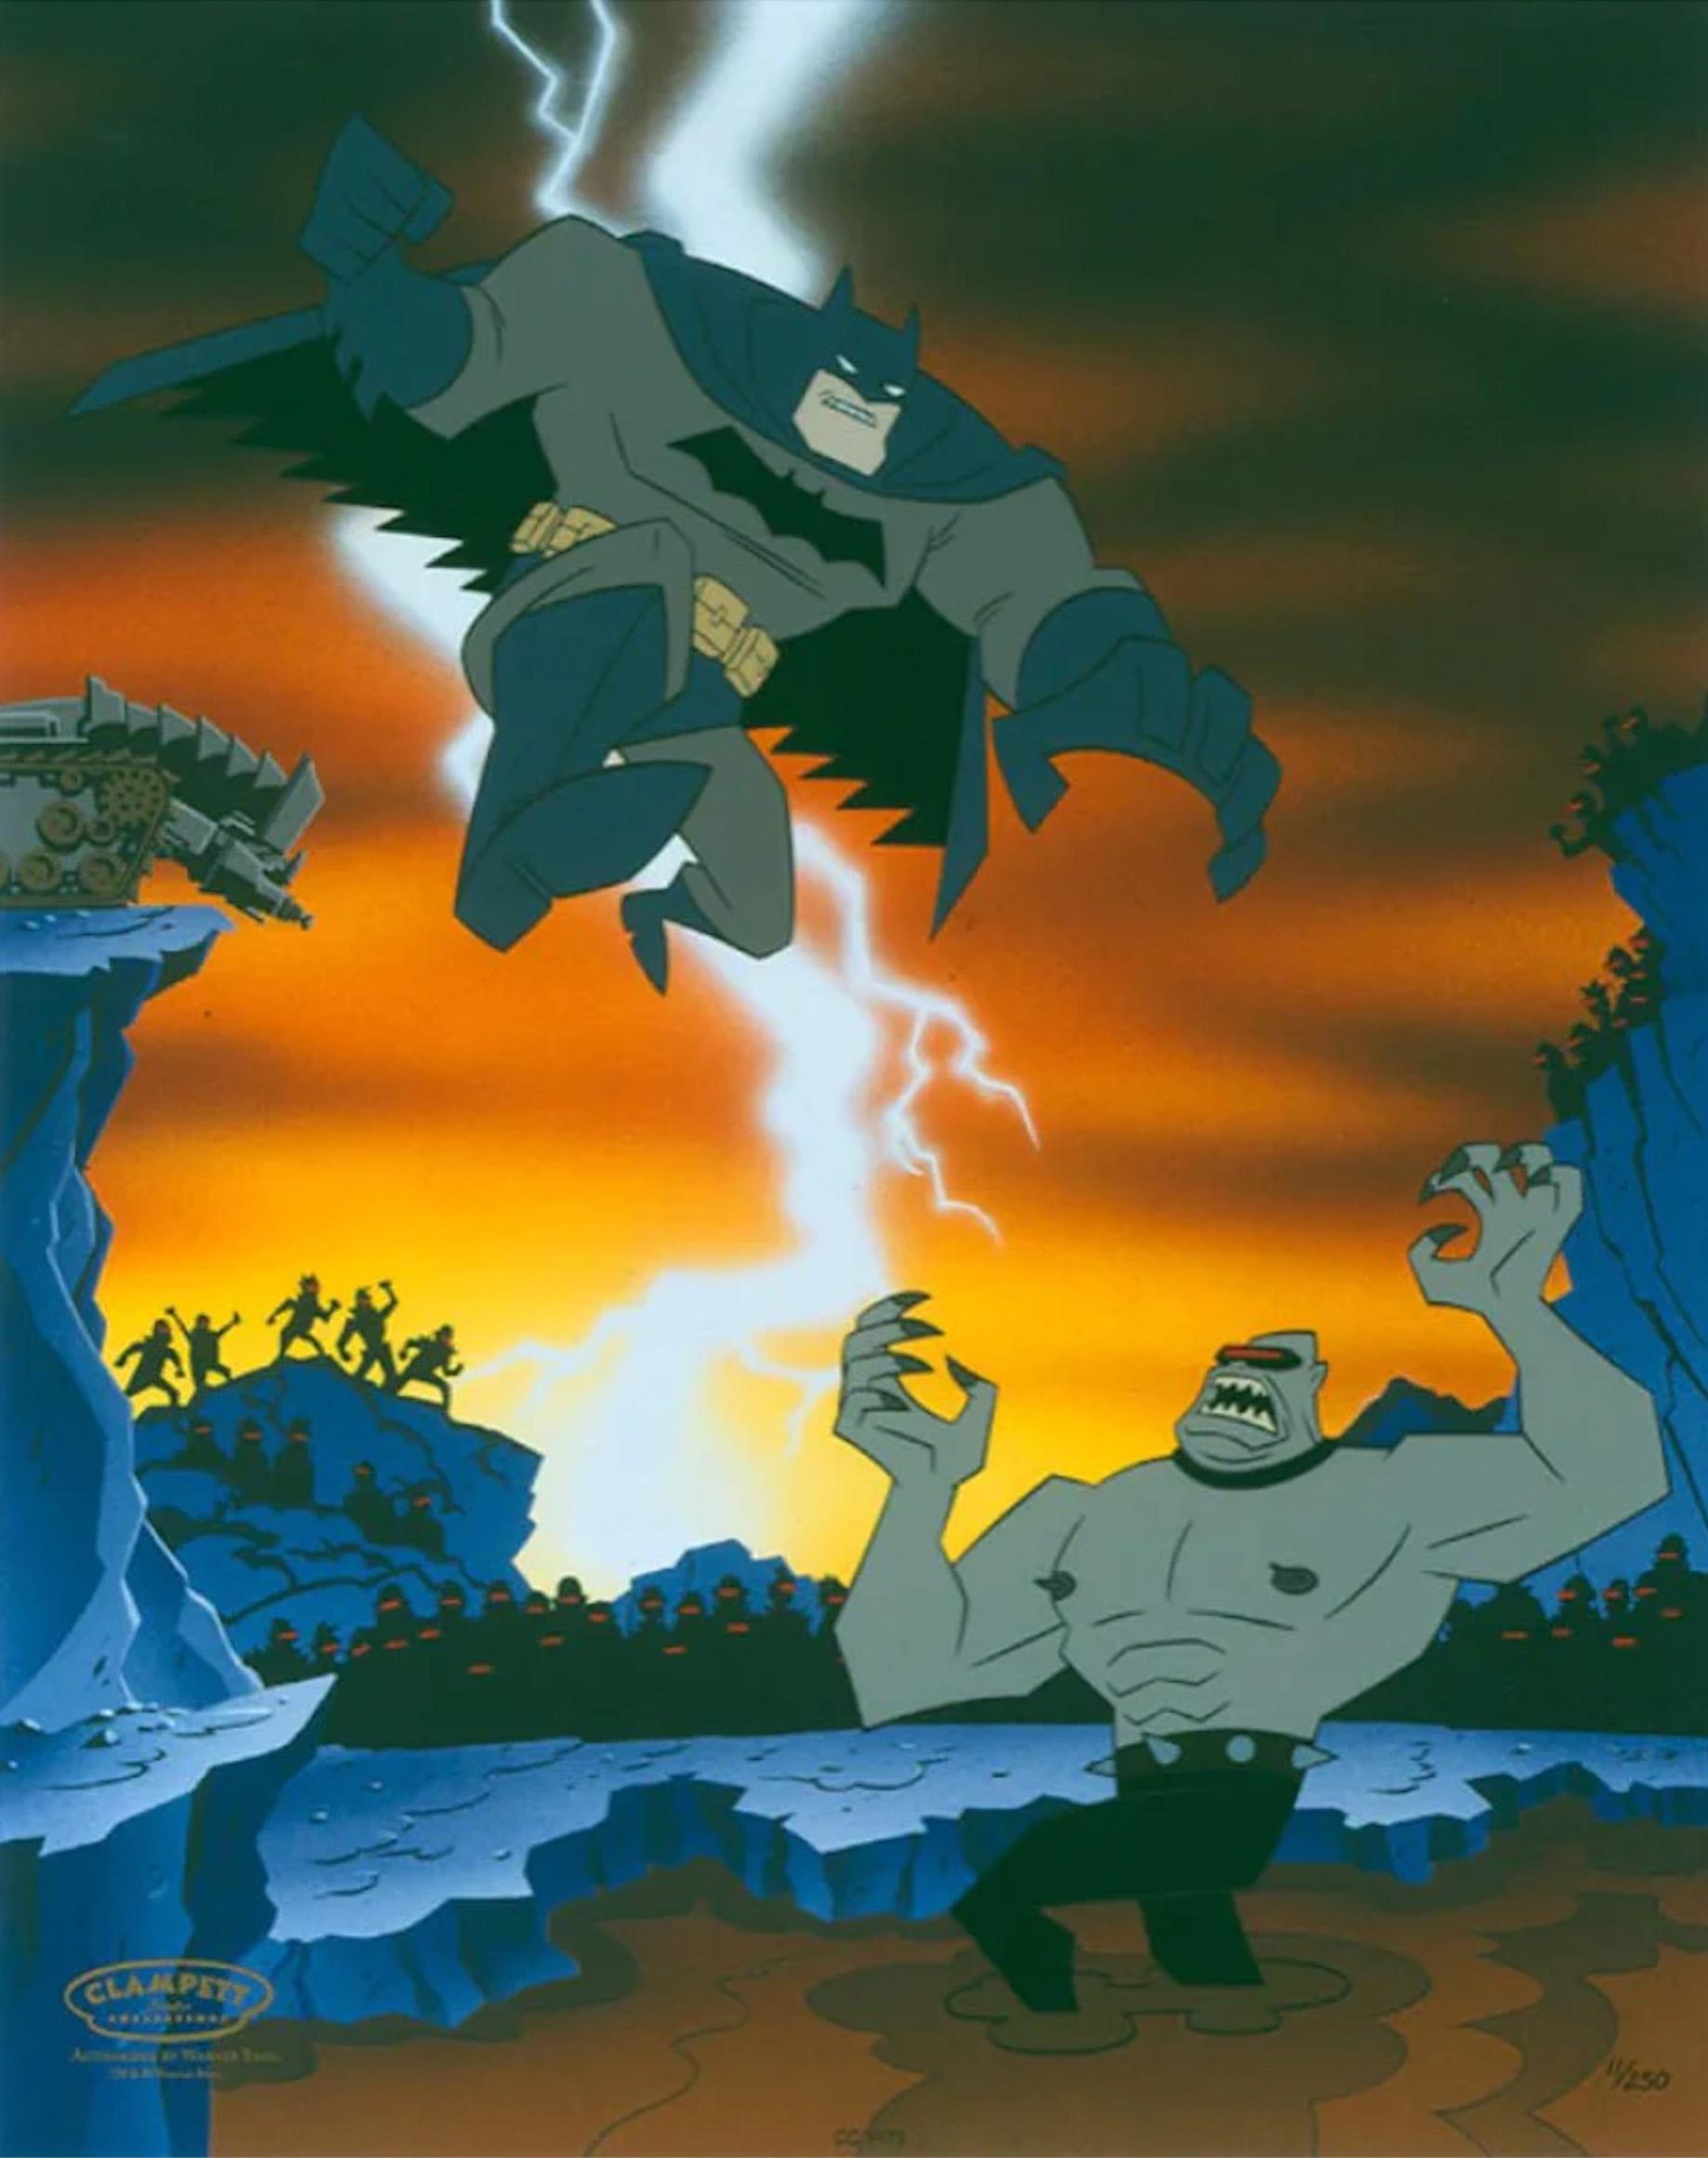 Legends of The Dark Knight Limited Edition Cel with Fine Art Gicleé signed by BT